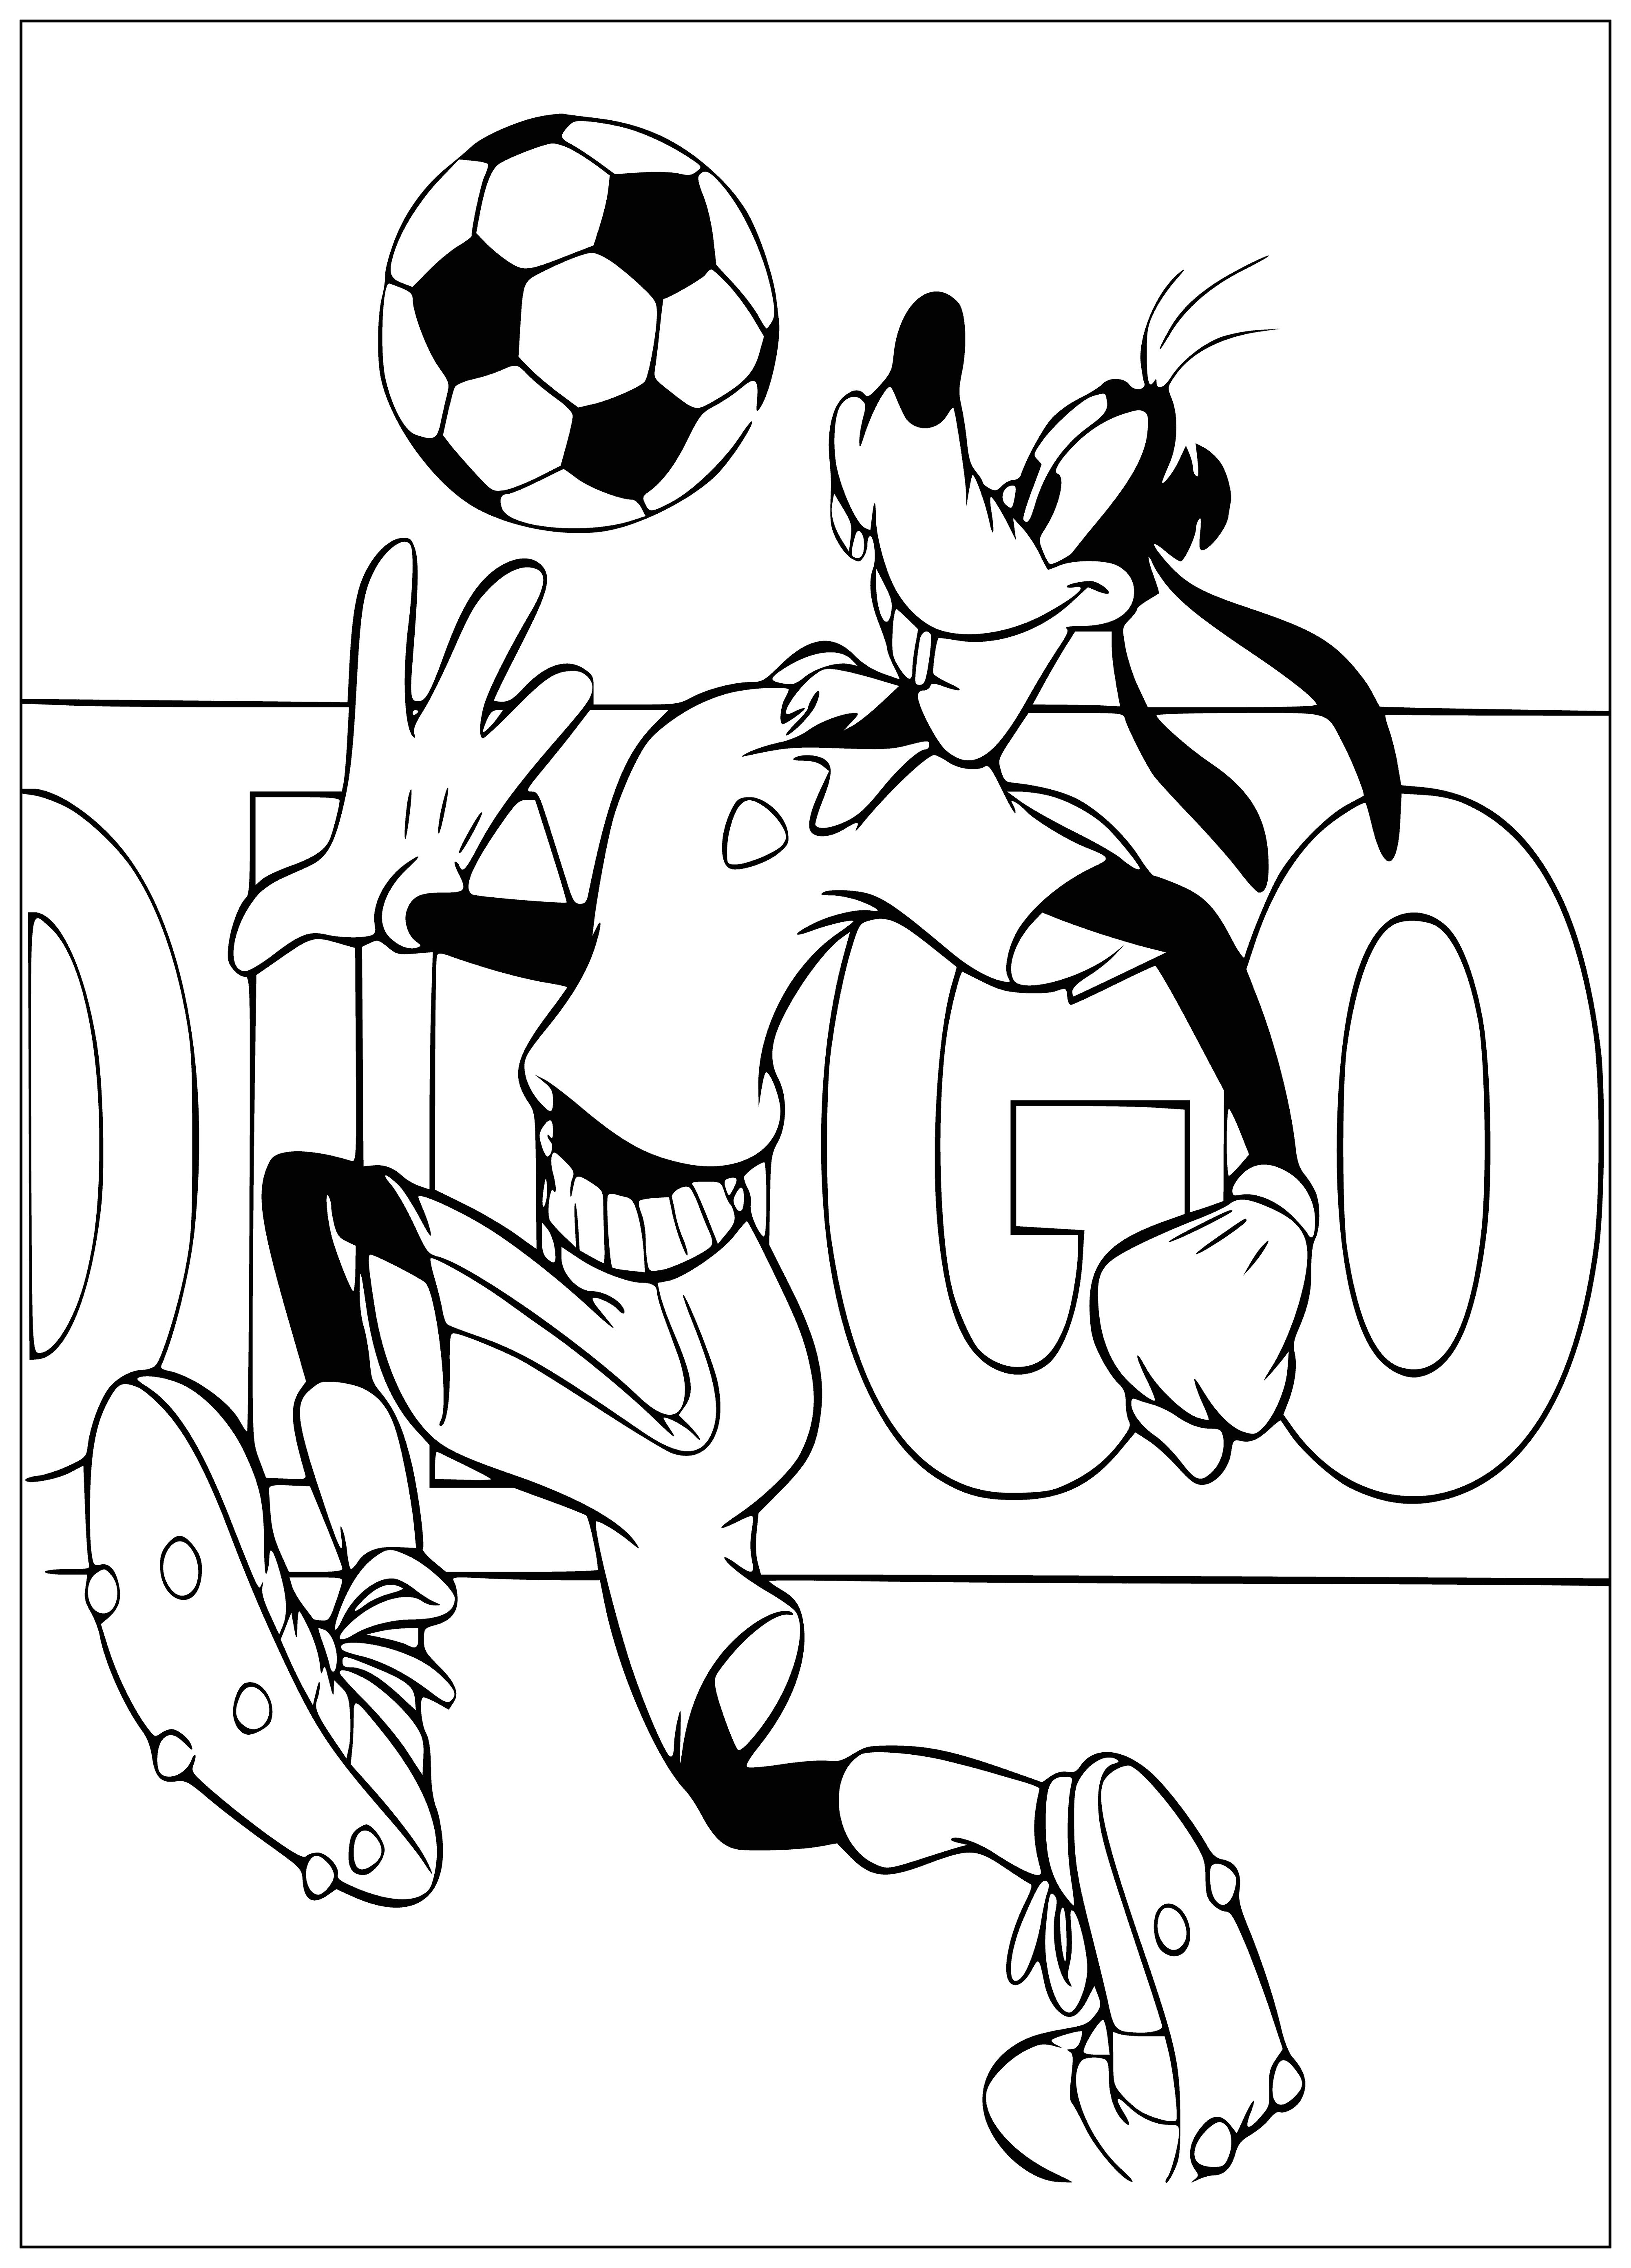 coloring page: Soccer players wear team uniforms & play on a field with other players to compete in the sport of football.